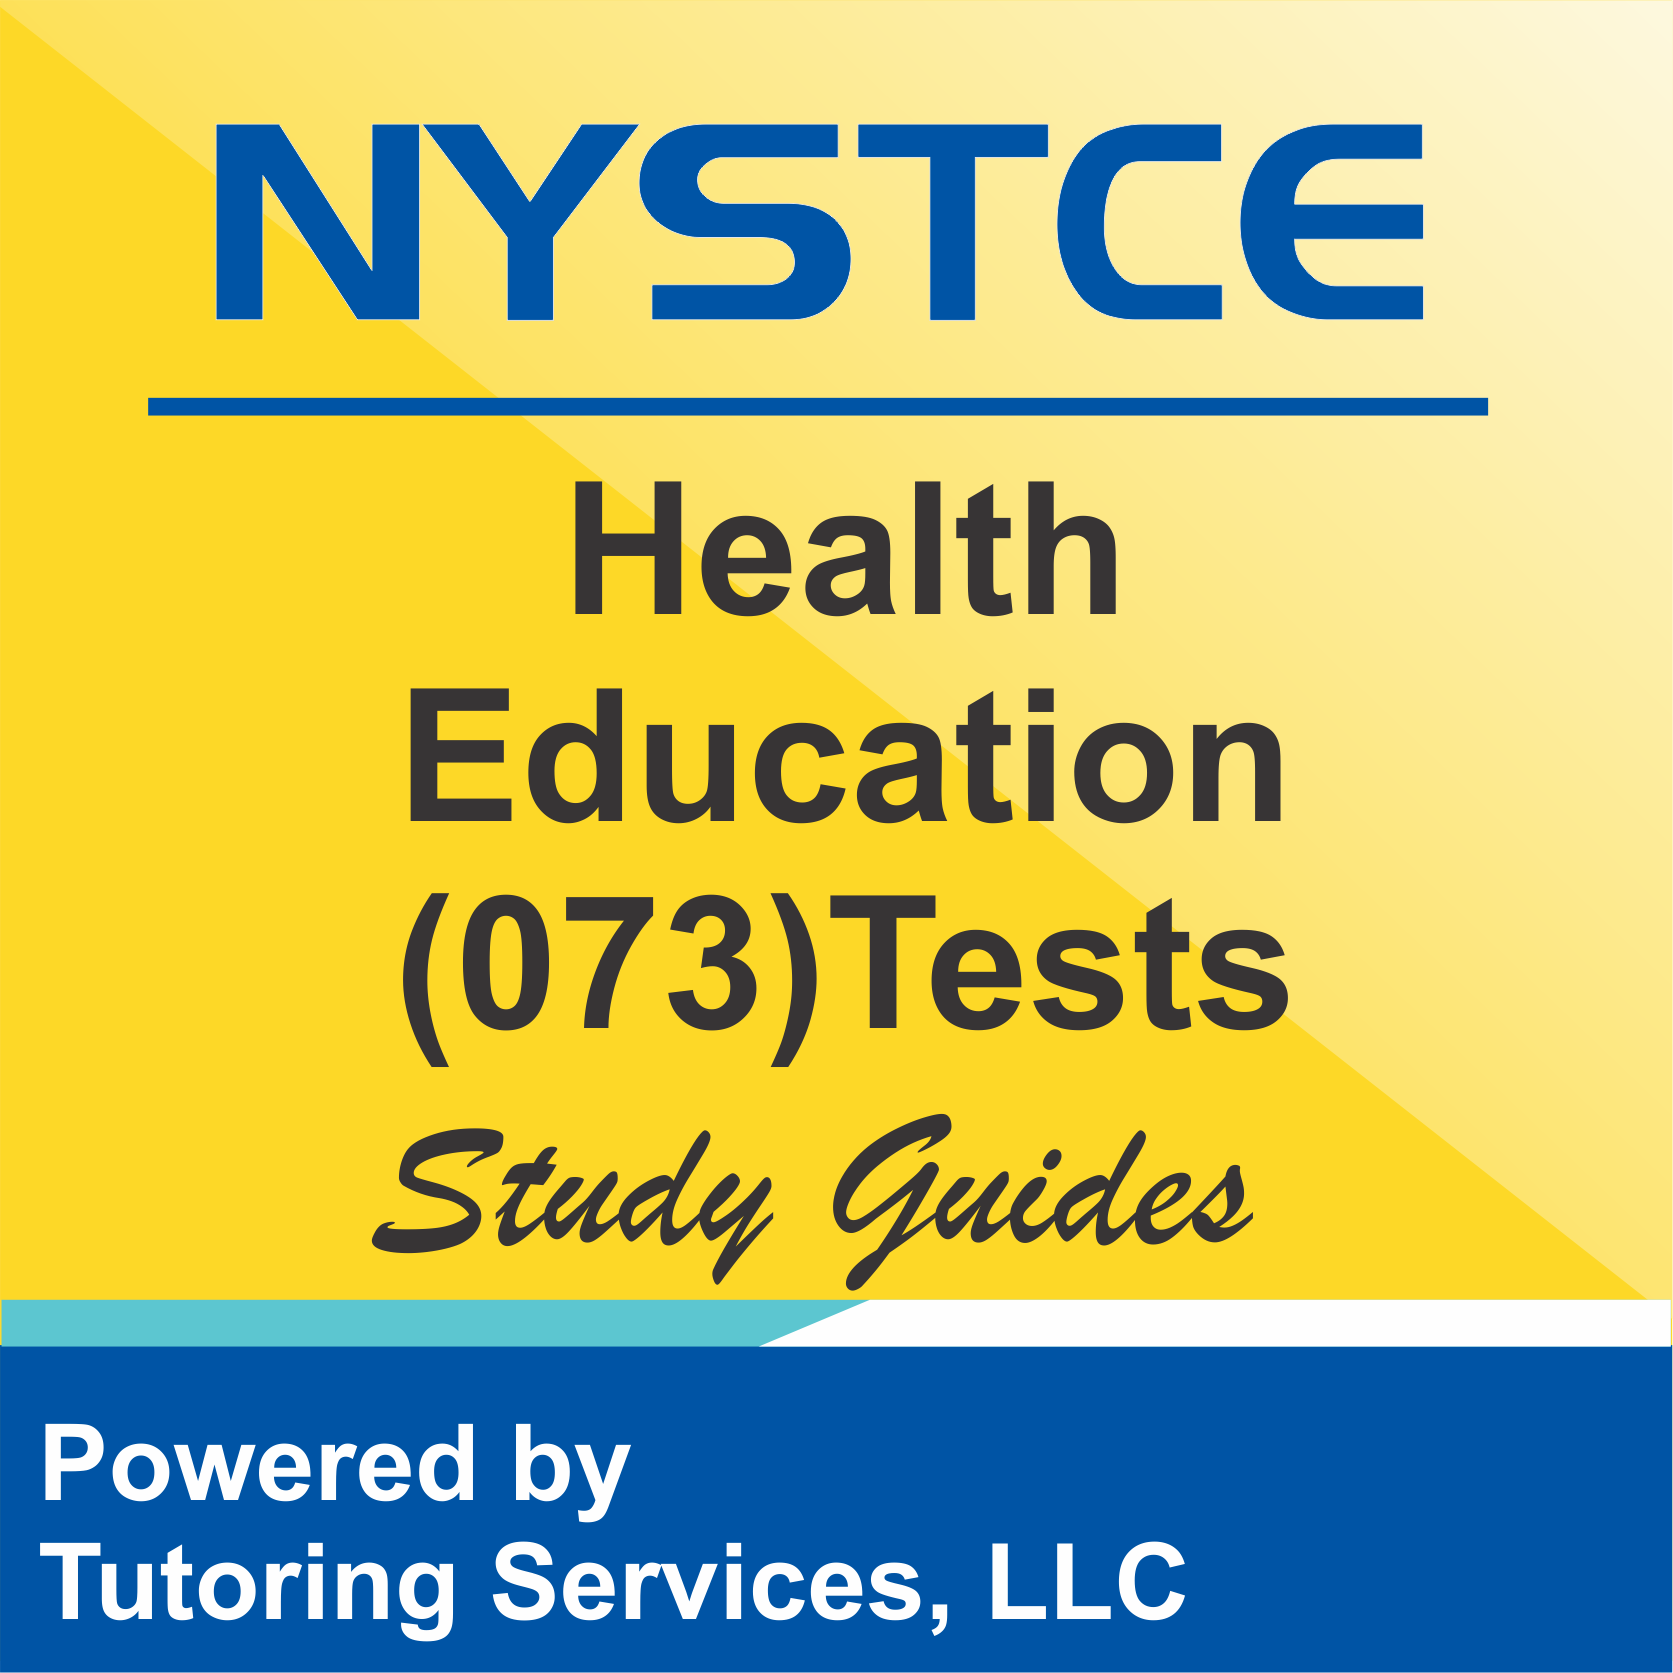 NYSTCE Certification Test for Health Education 073